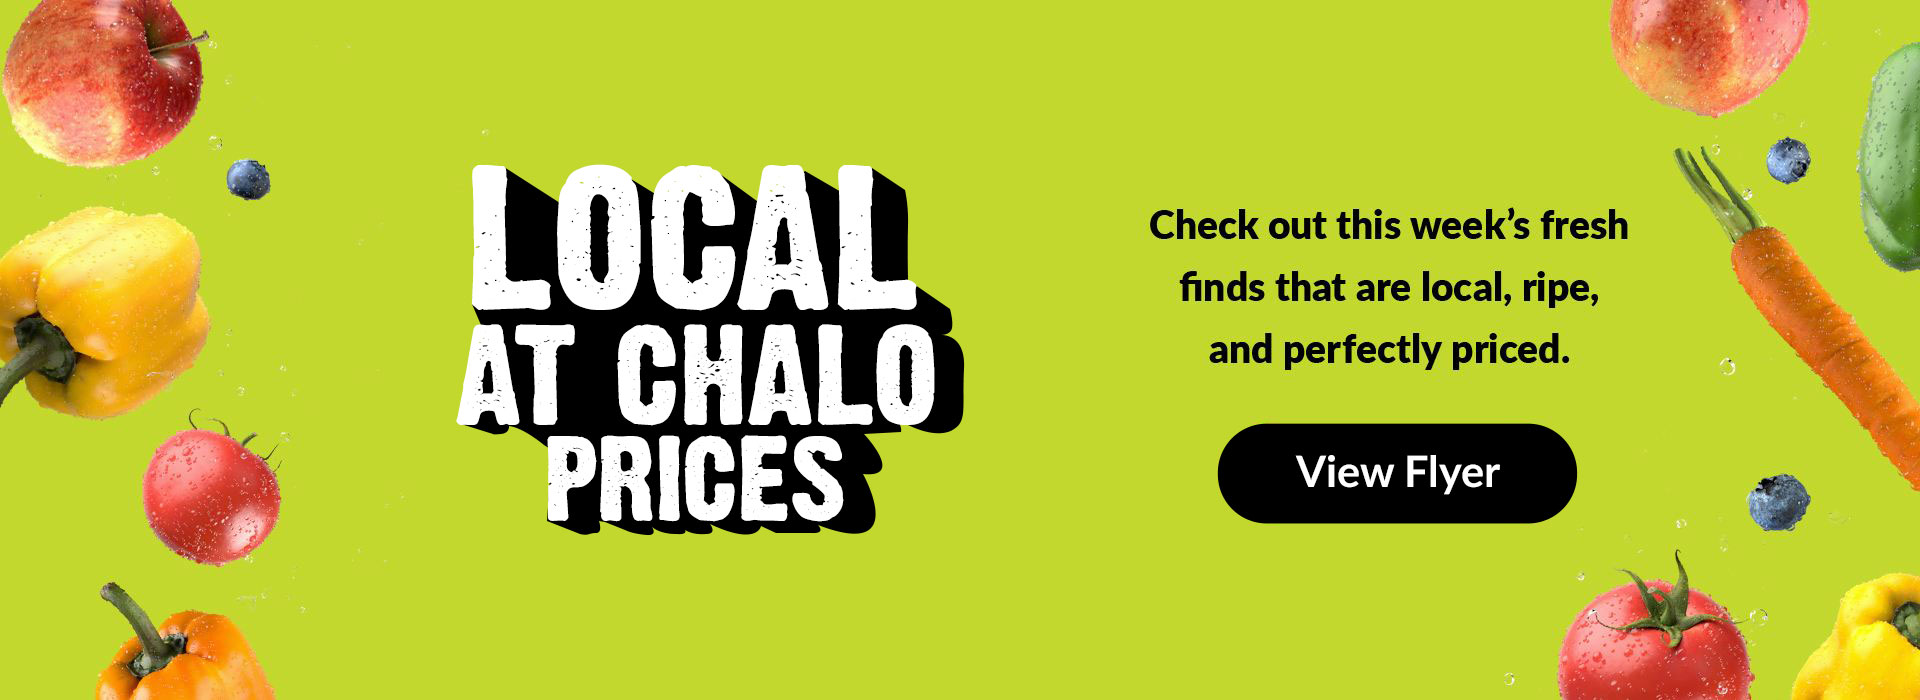 Text Reading 'Local at chalo prices. Check out this week's fresh finds that are local, ripe, and perfectly priced. For more details View Flyer from the button given below.'